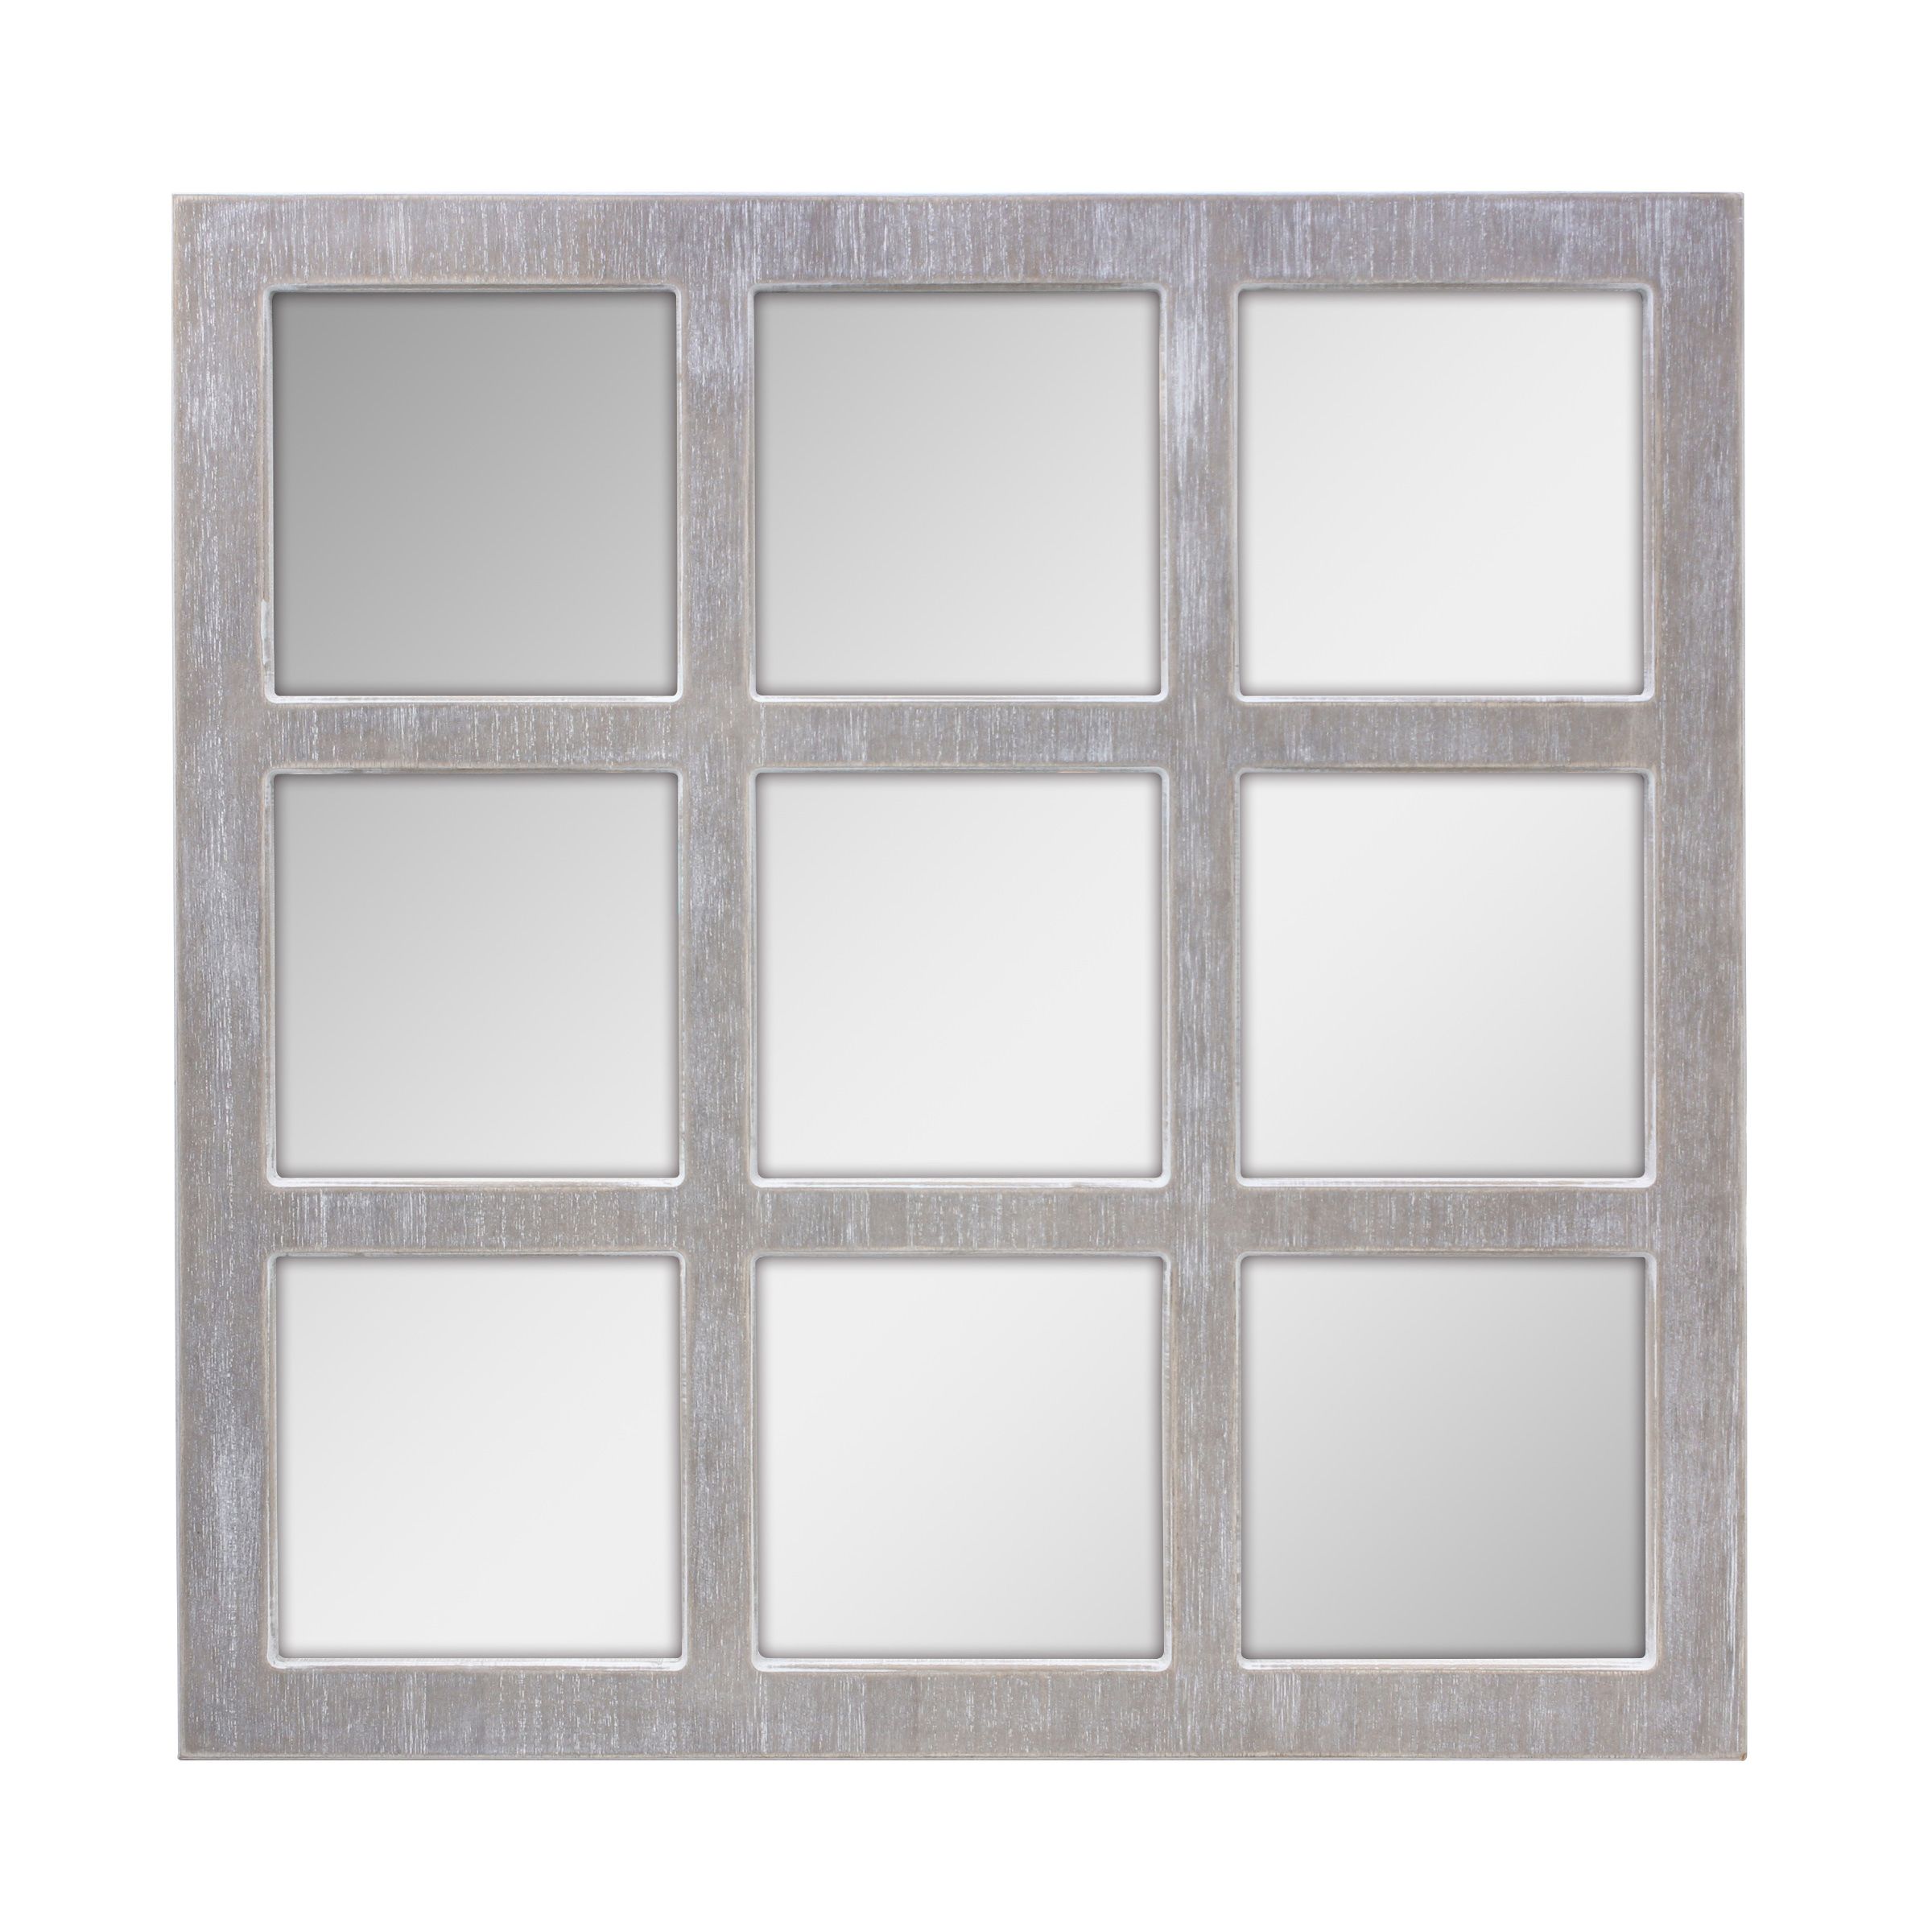 Stonebriar Square Rustic 9 Panel Window Pane Hanging Wall Mirror With Pertaining To White Square Wall Mirrors (View 8 of 15)